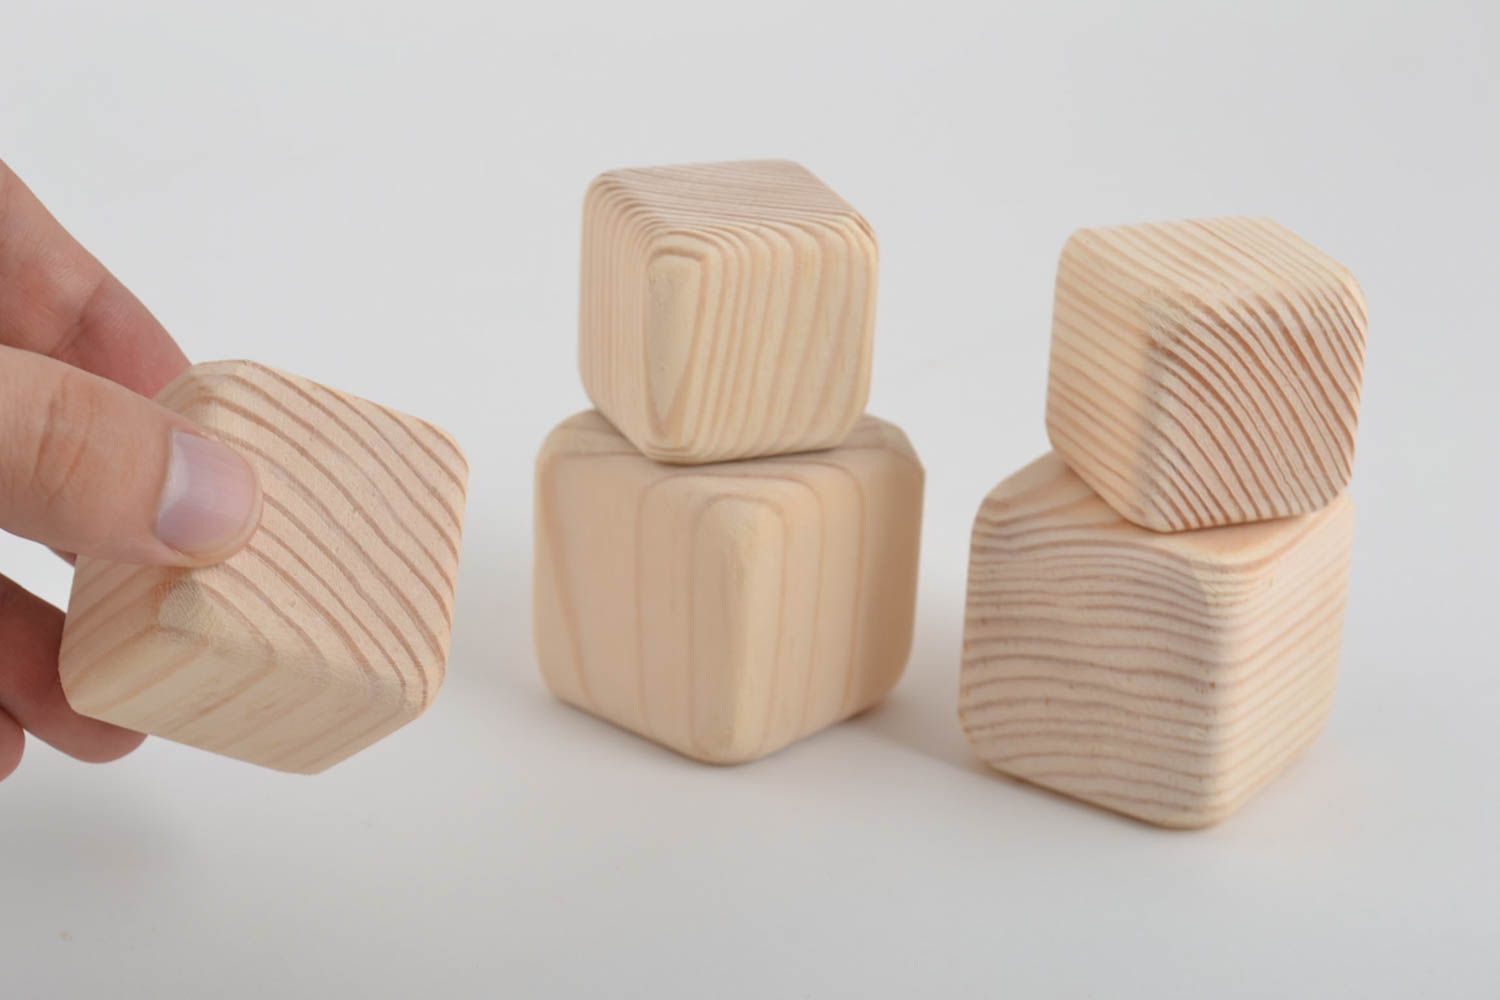 Set of 5 handmade wooden blank cubes wooden blocks toys for kids wooden craft photo 4